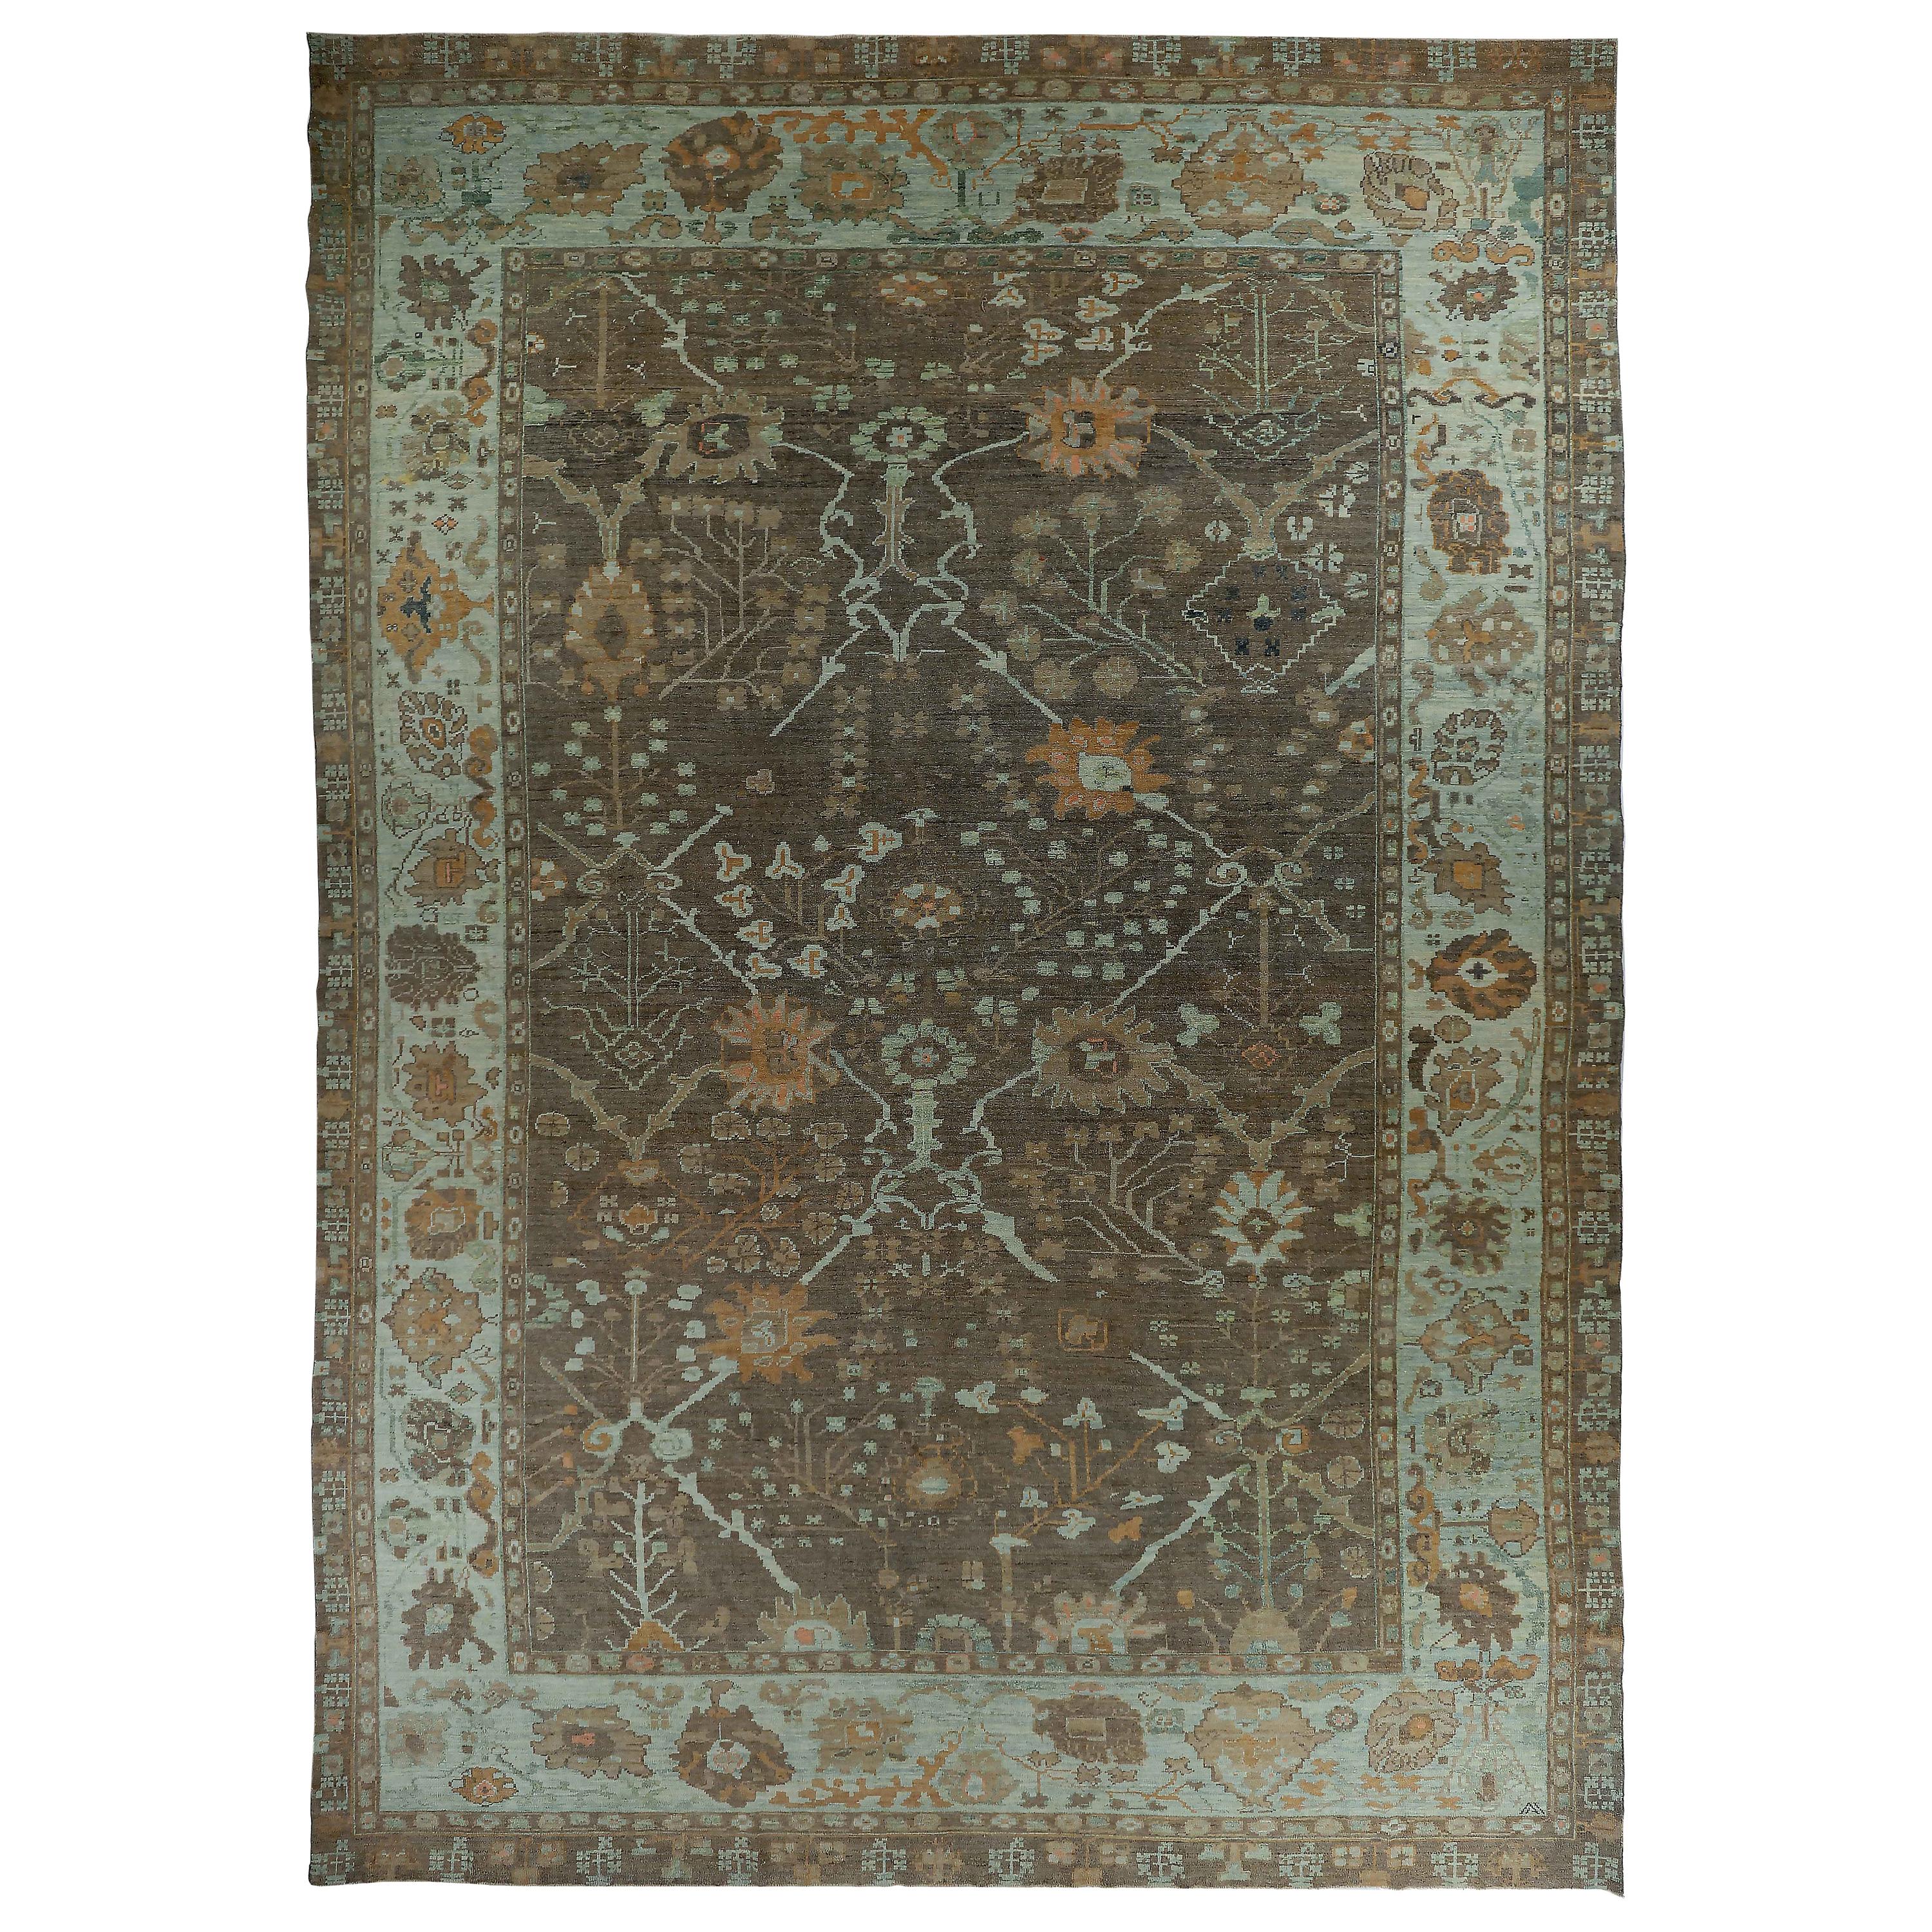 New Oversize Turkish Oushak Rug with Brown and Green Floral Details